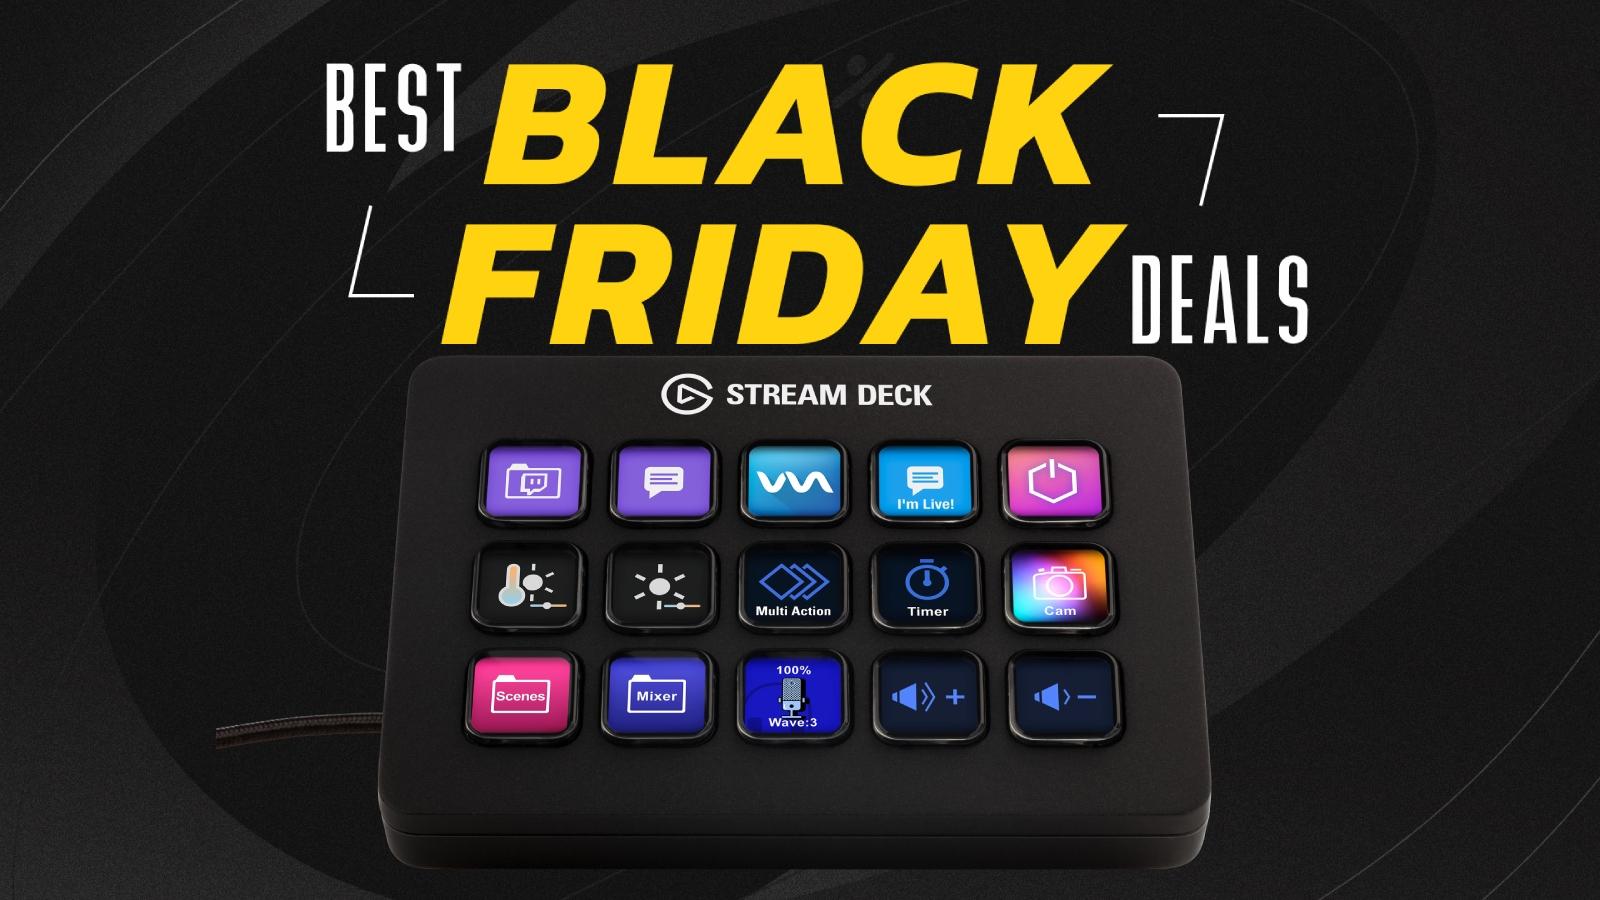 Stream Deck on Black Friday background with yellow lettering